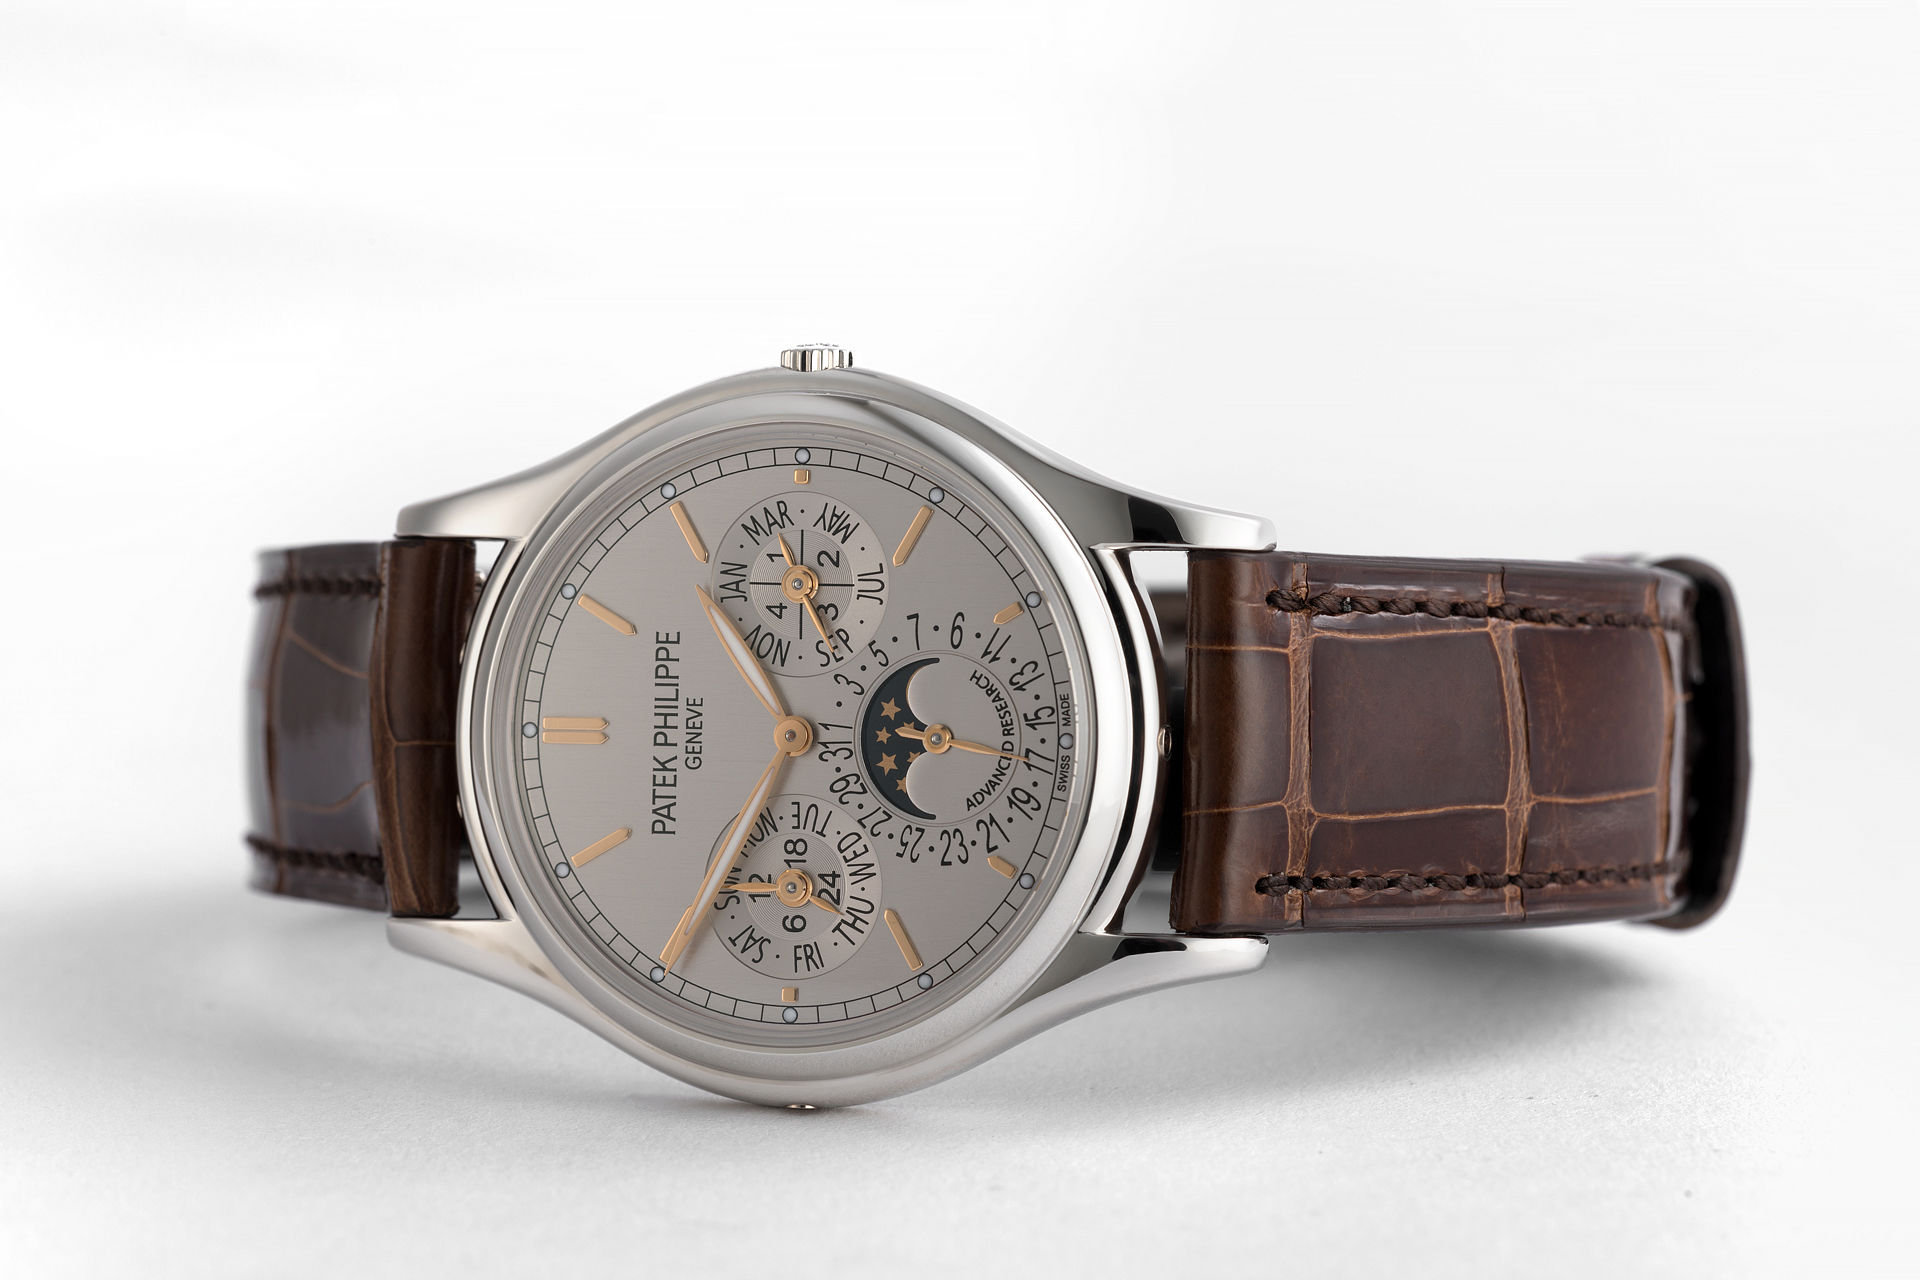 ref 5550P-001 | Platinum Limited Edition of 300 | Patek Philippe Advanced Research